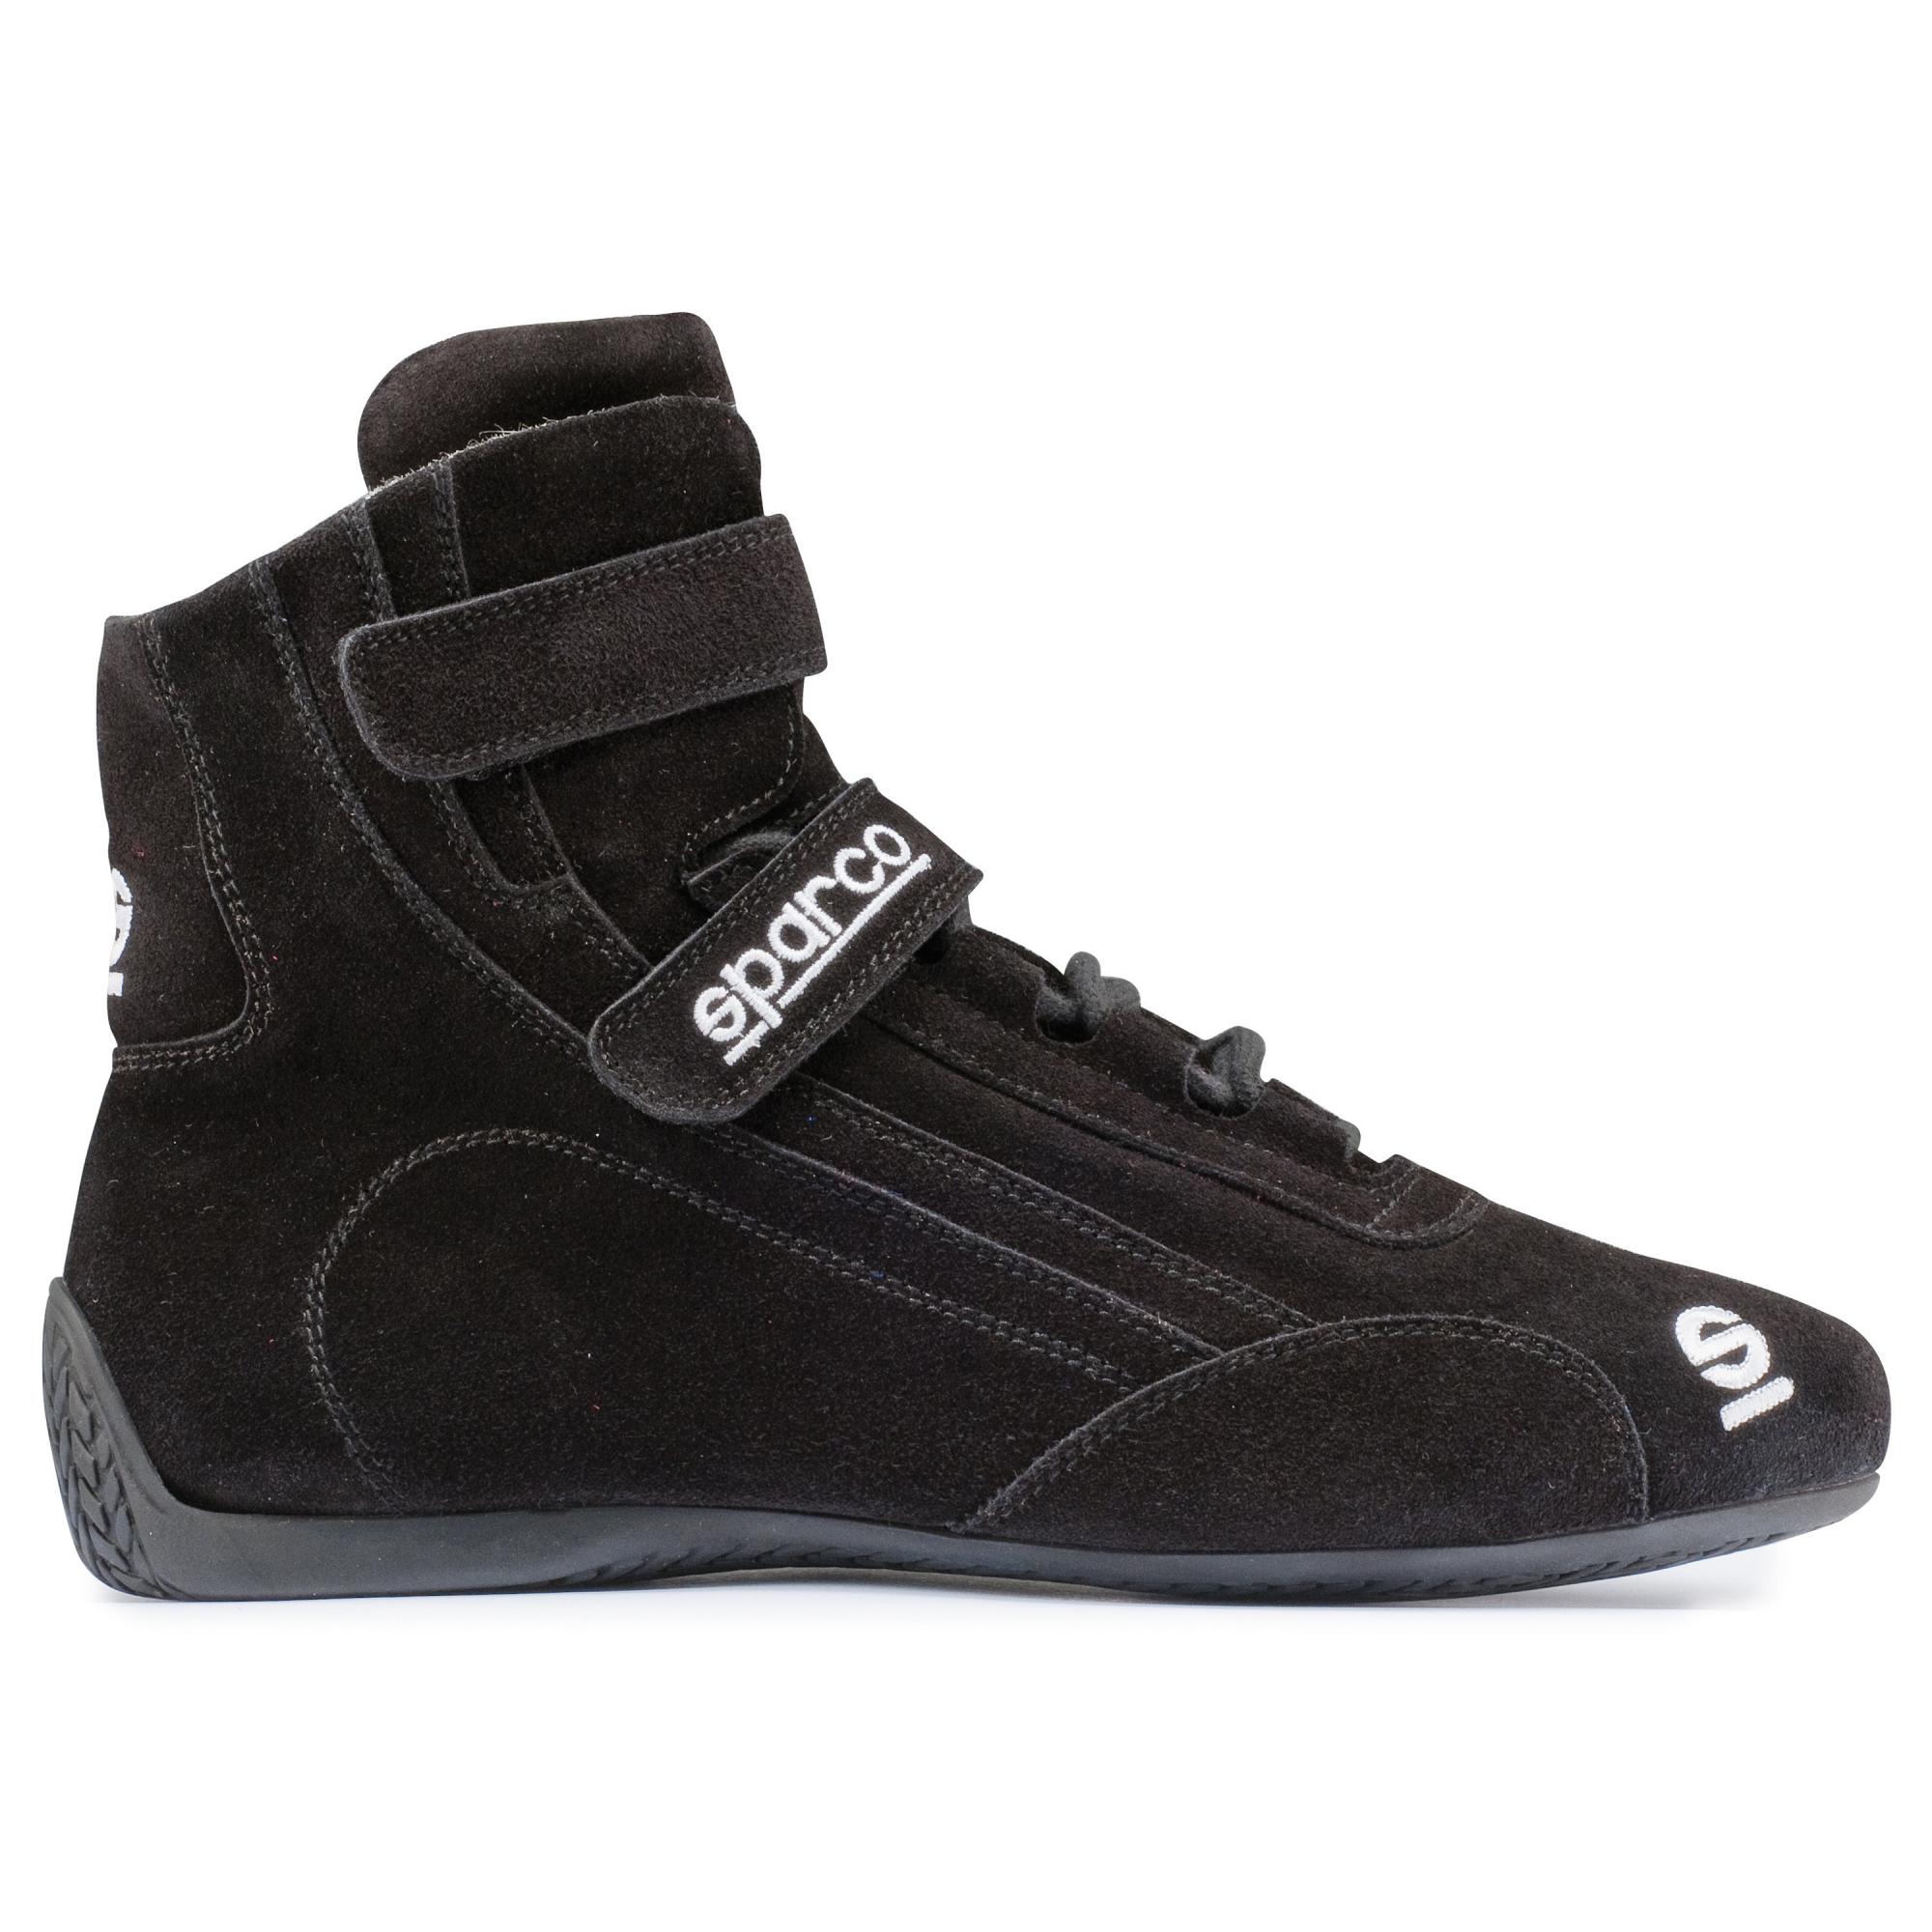 Sparco Top Driver SH-5 Race Boots in Black from Merlin Motorsport